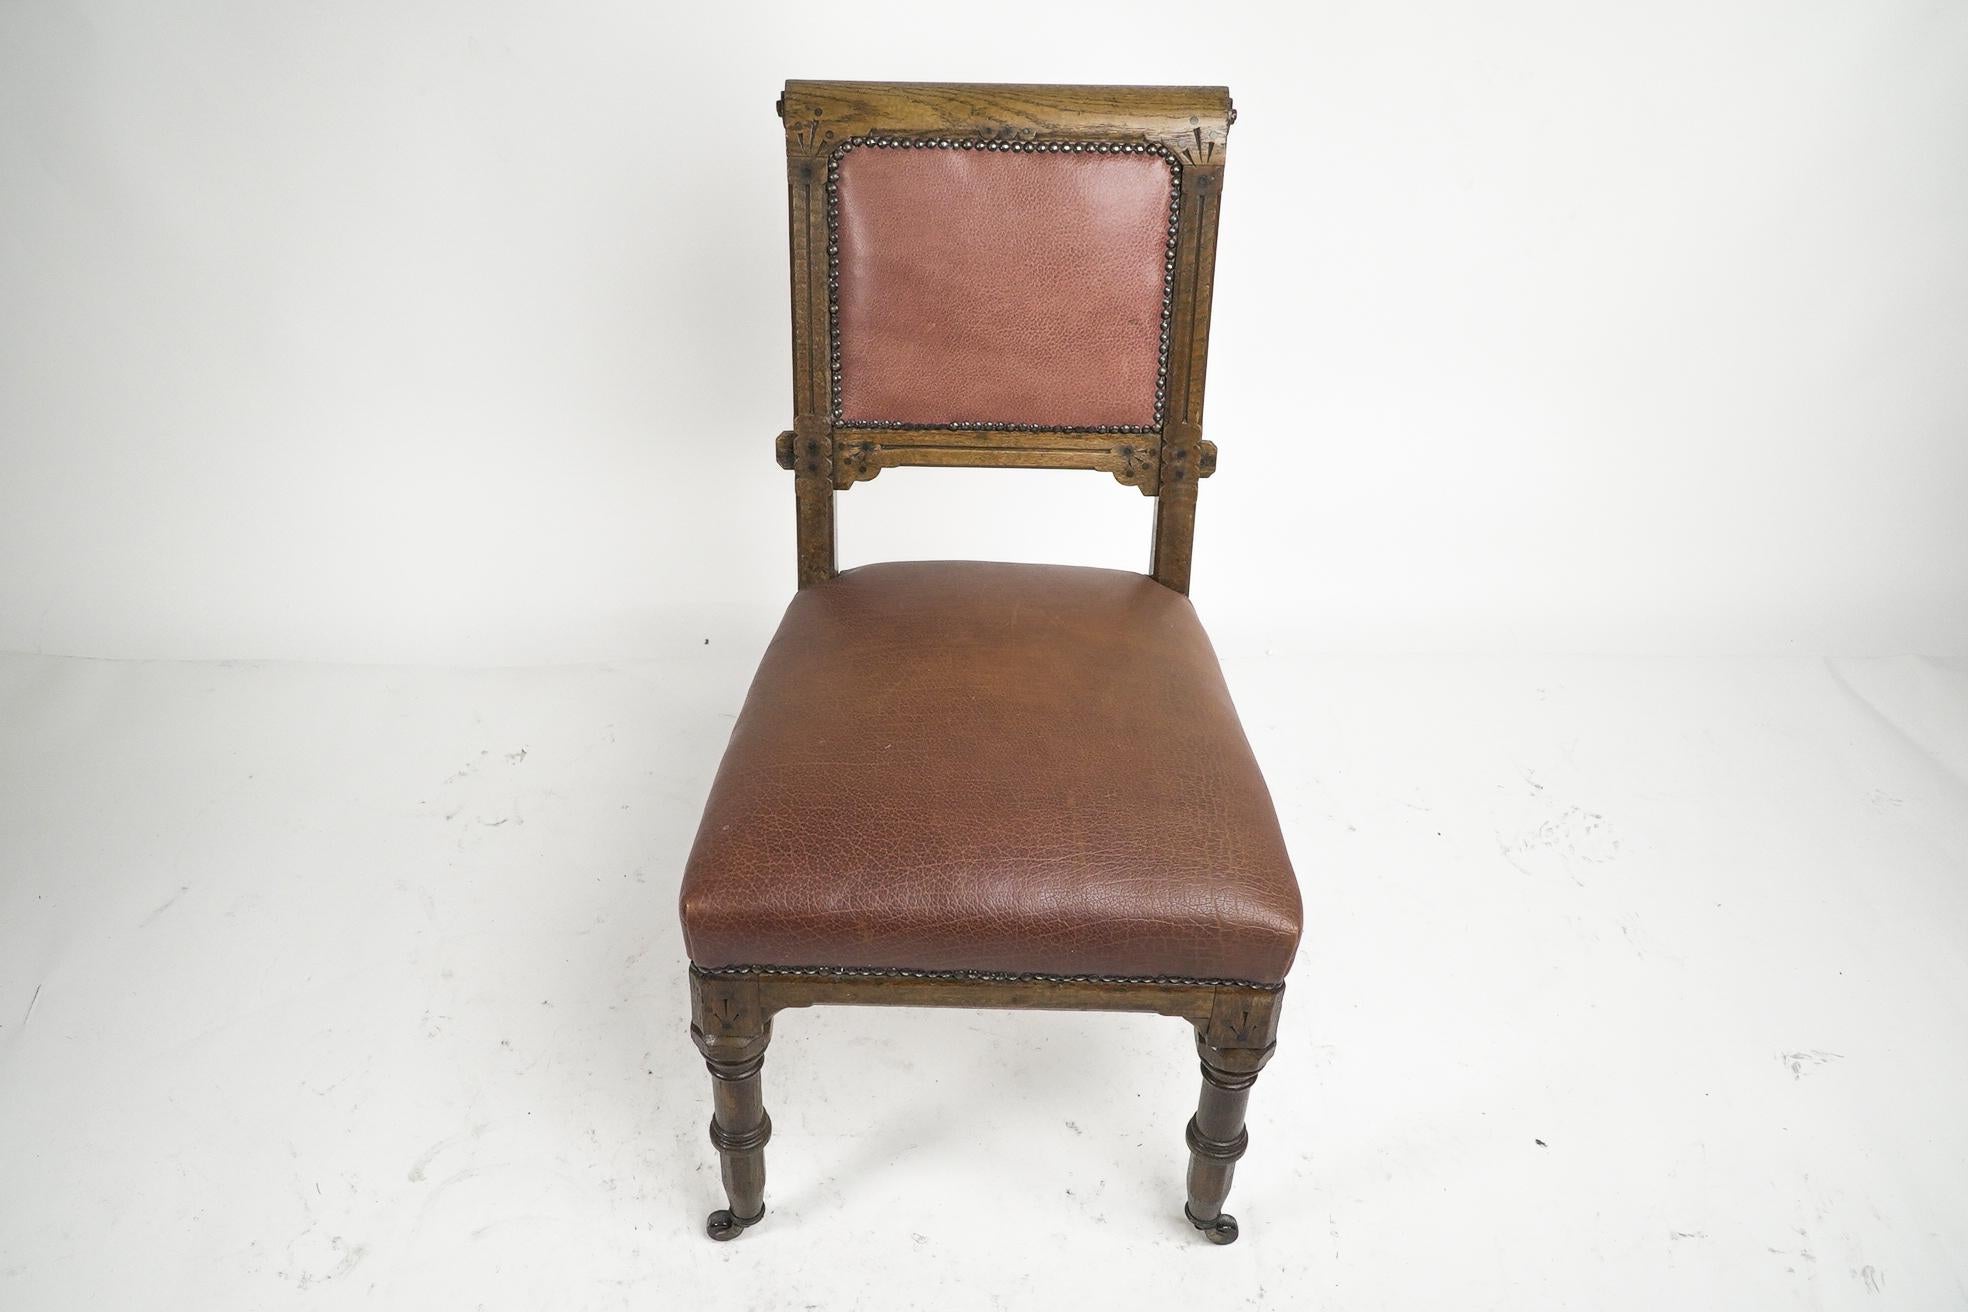 English Charles Bevan attributed. A Gothic Revival side chair with scroll carvings For Sale